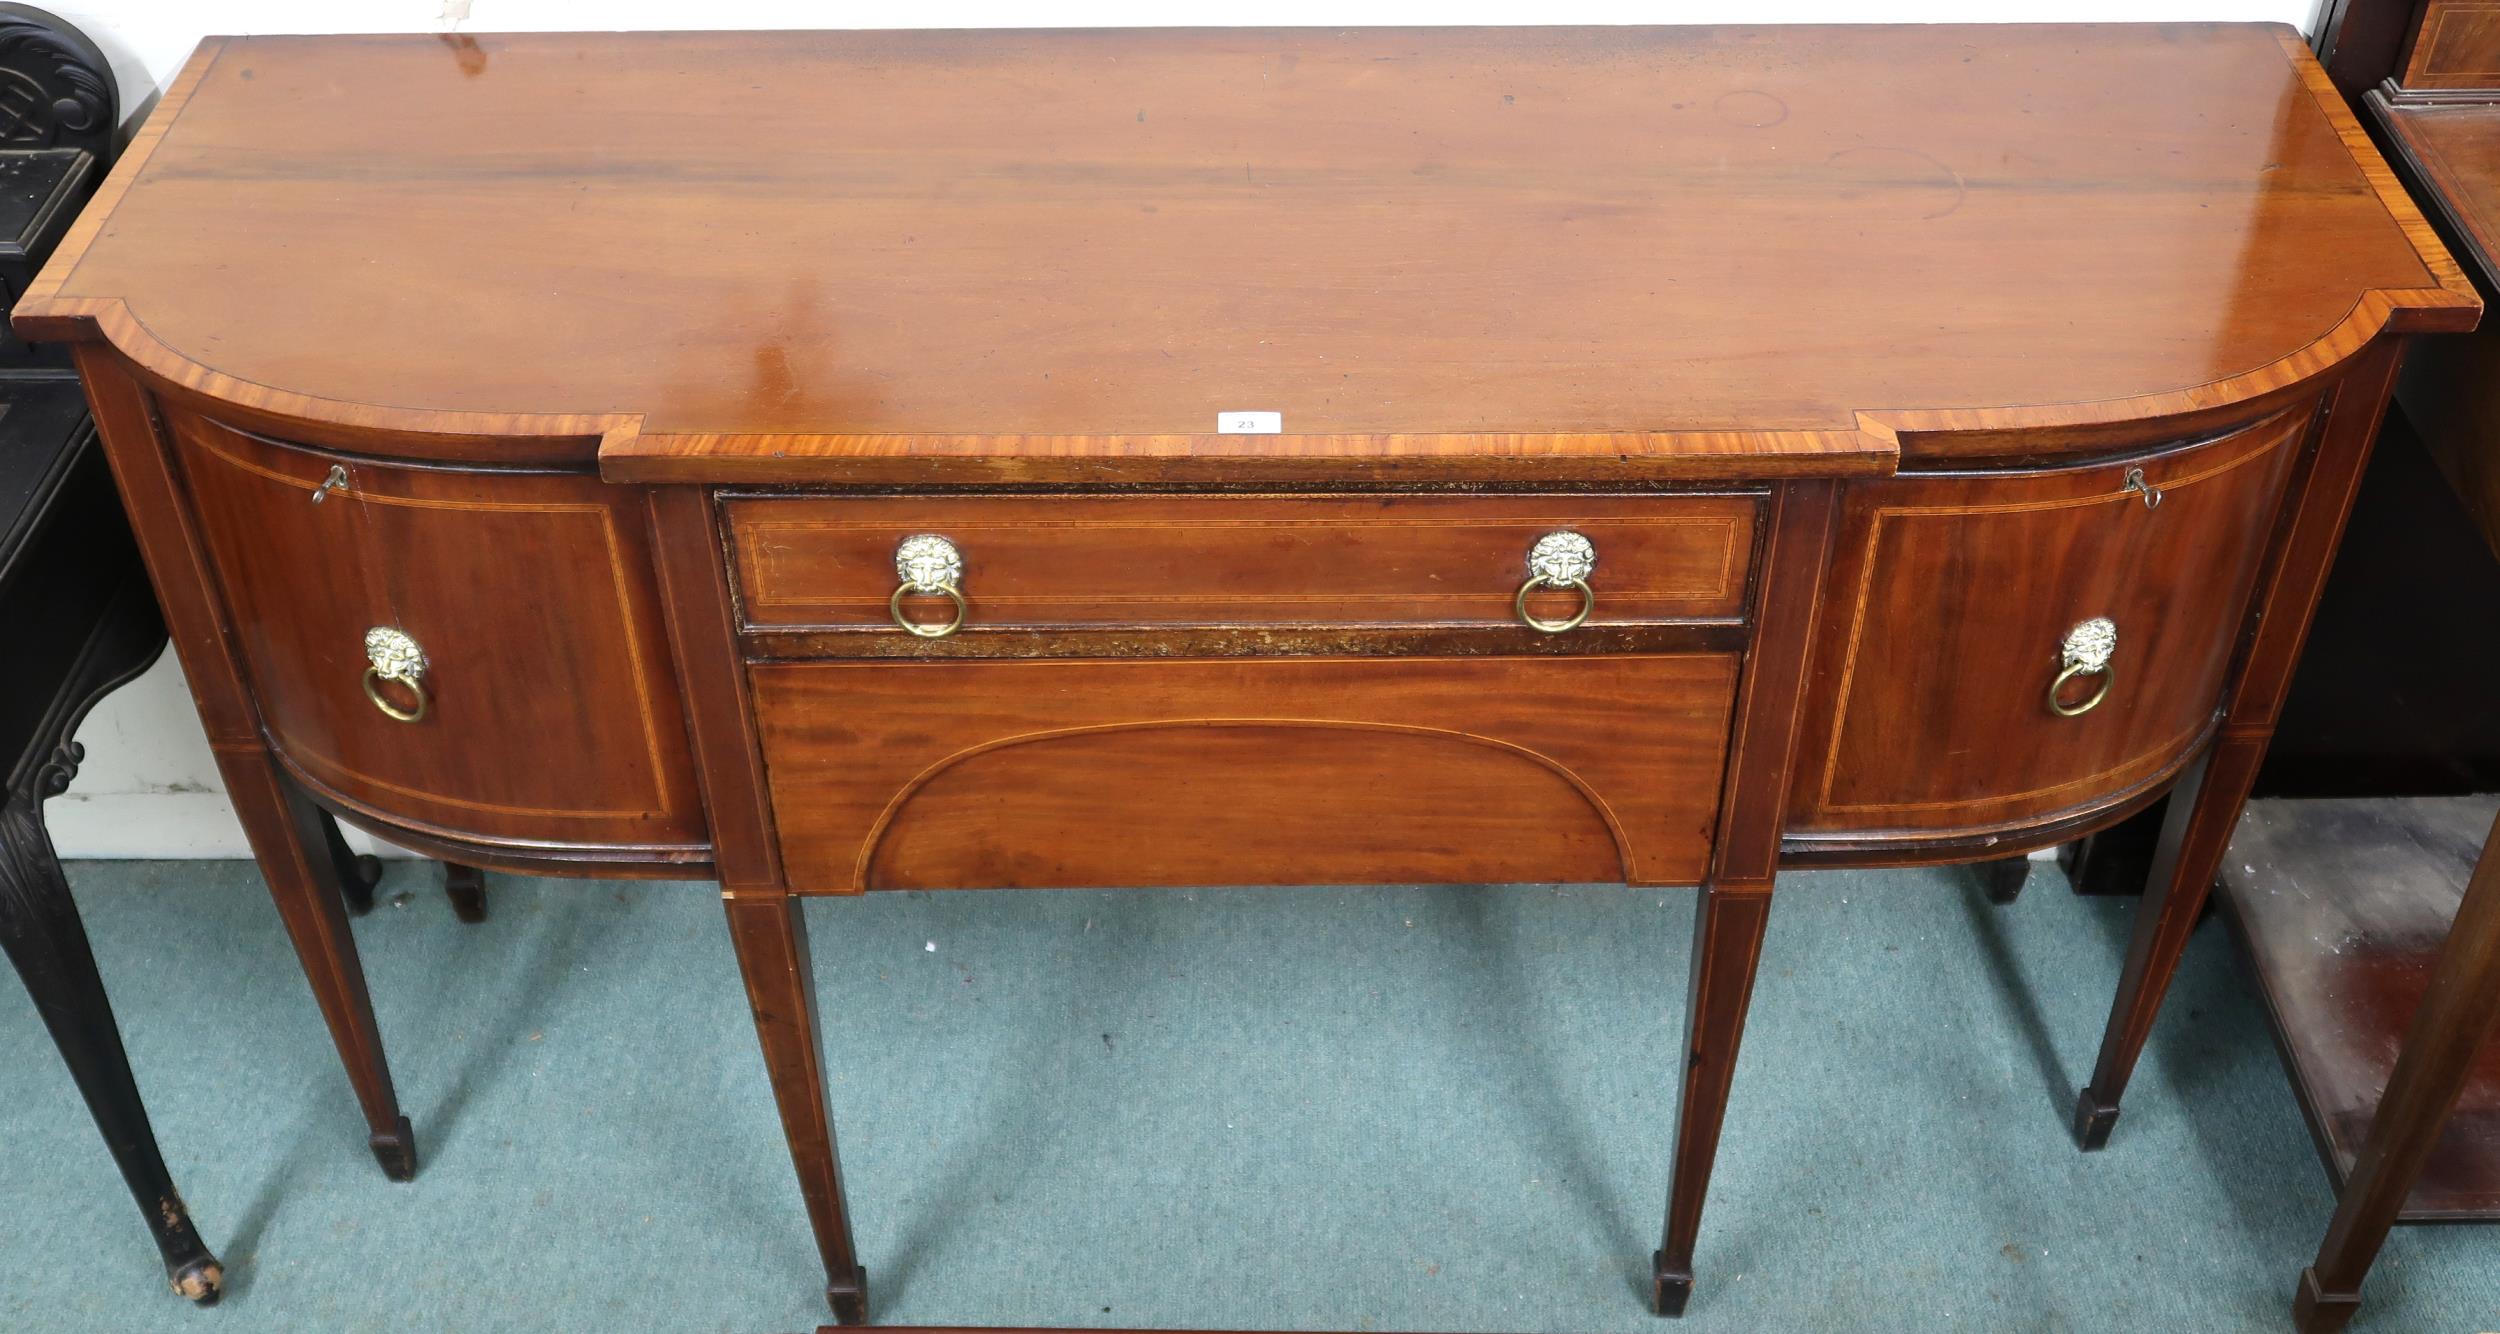 A 19th century mahogany sideboard with two central drawers flanked by bowed cabinet doors on - Image 2 of 3